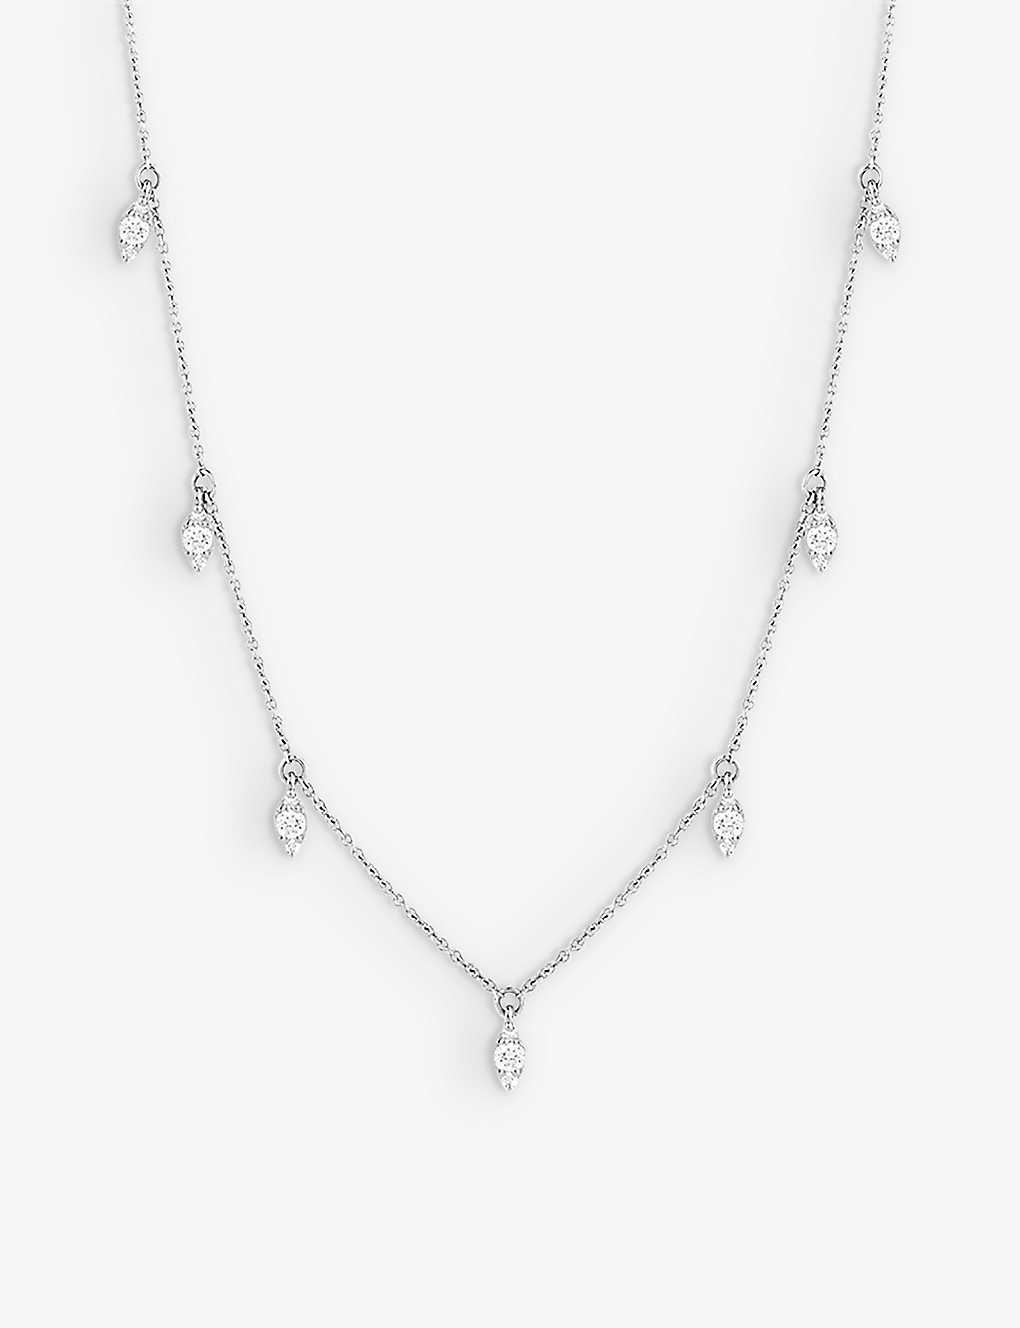 The Alkemistry Womens 14ct White Gold Dana Rebecca Pear Drop 14ct White-gold And Diamond Necklace